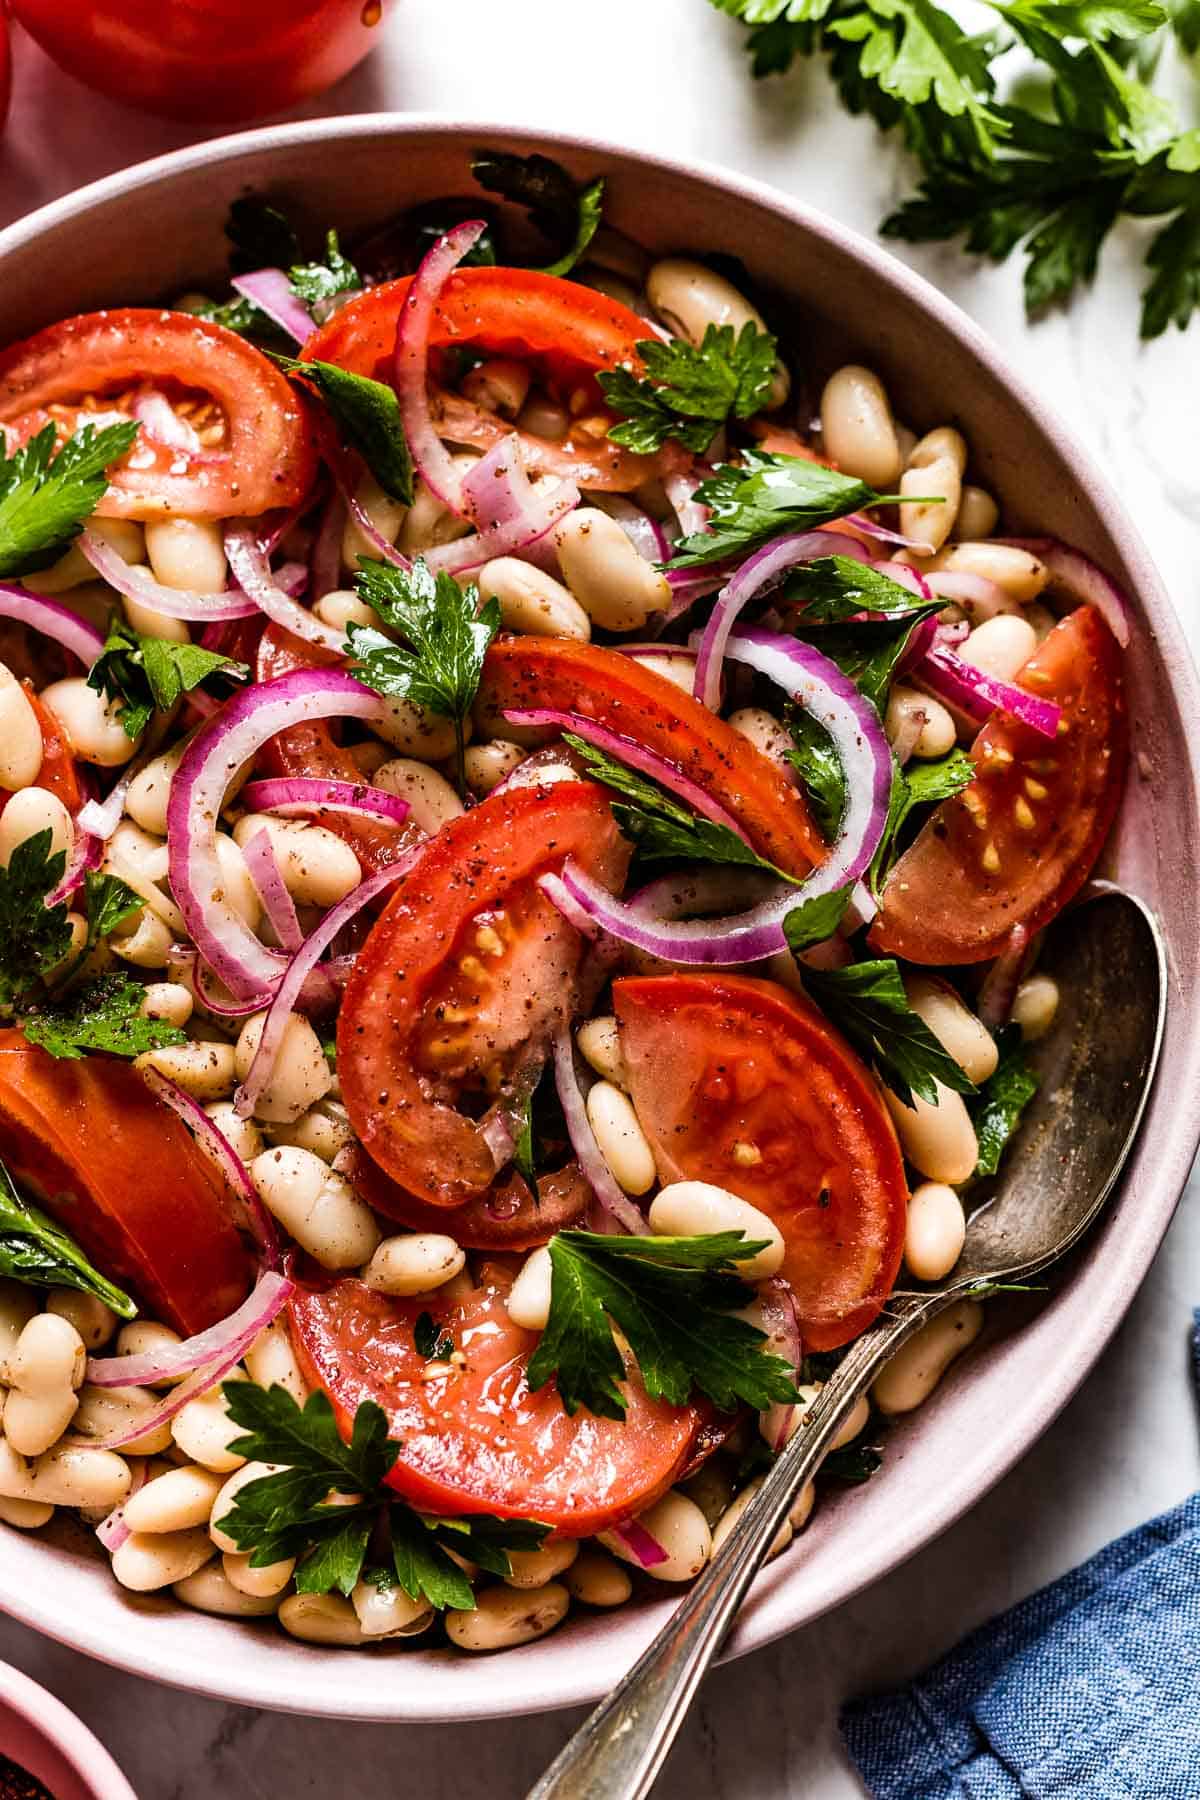 Tomato Salad with white beans from the top view